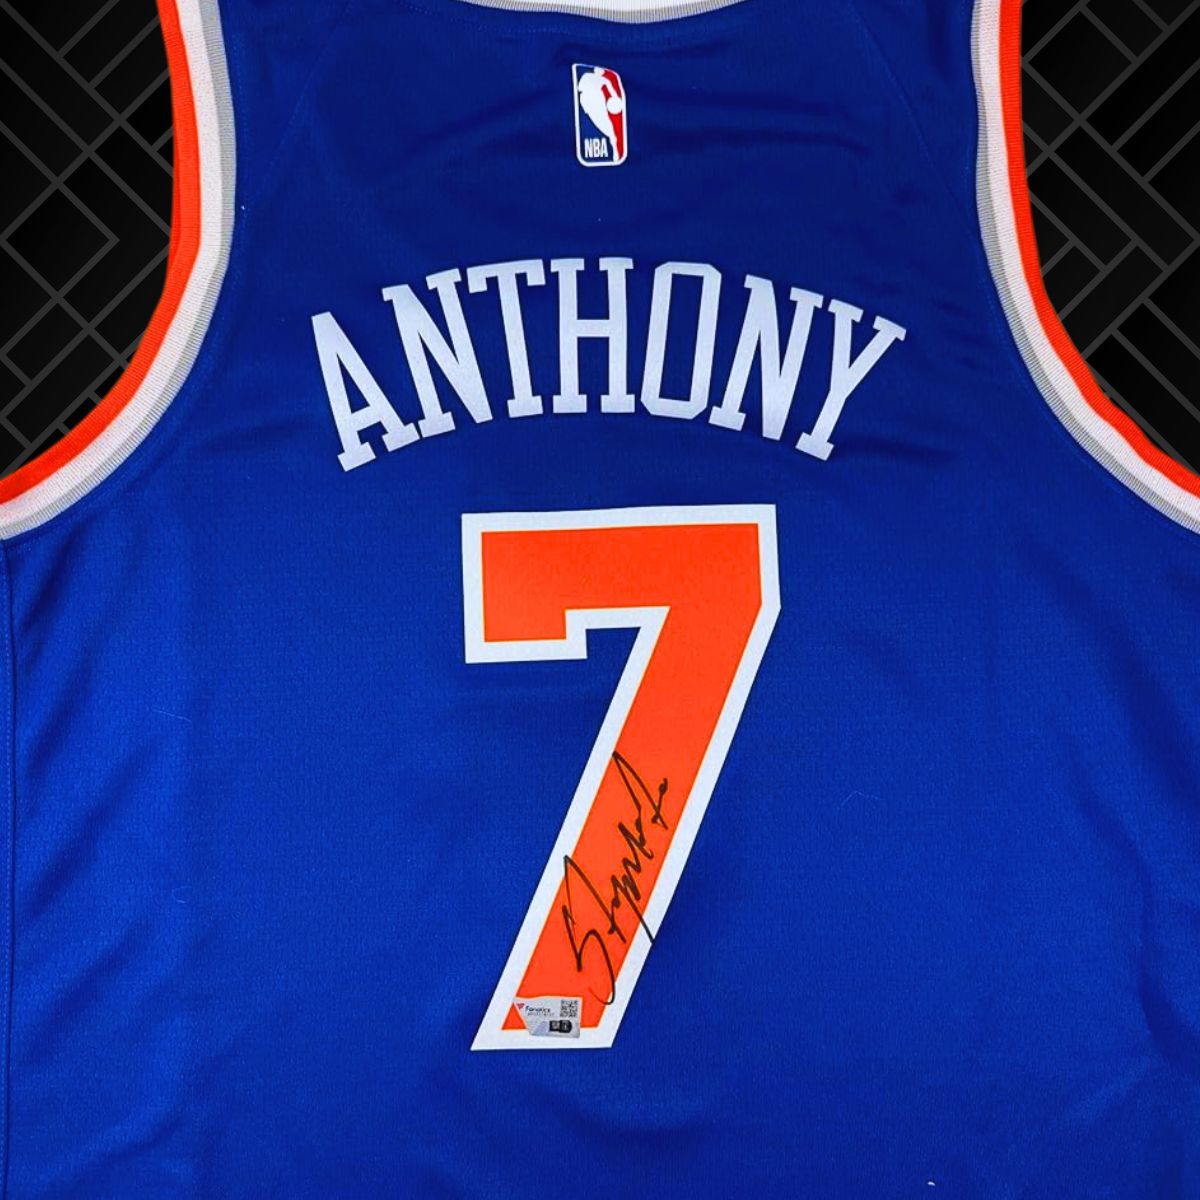 Does Carmelo Anthony Knicks jersey come with autographs